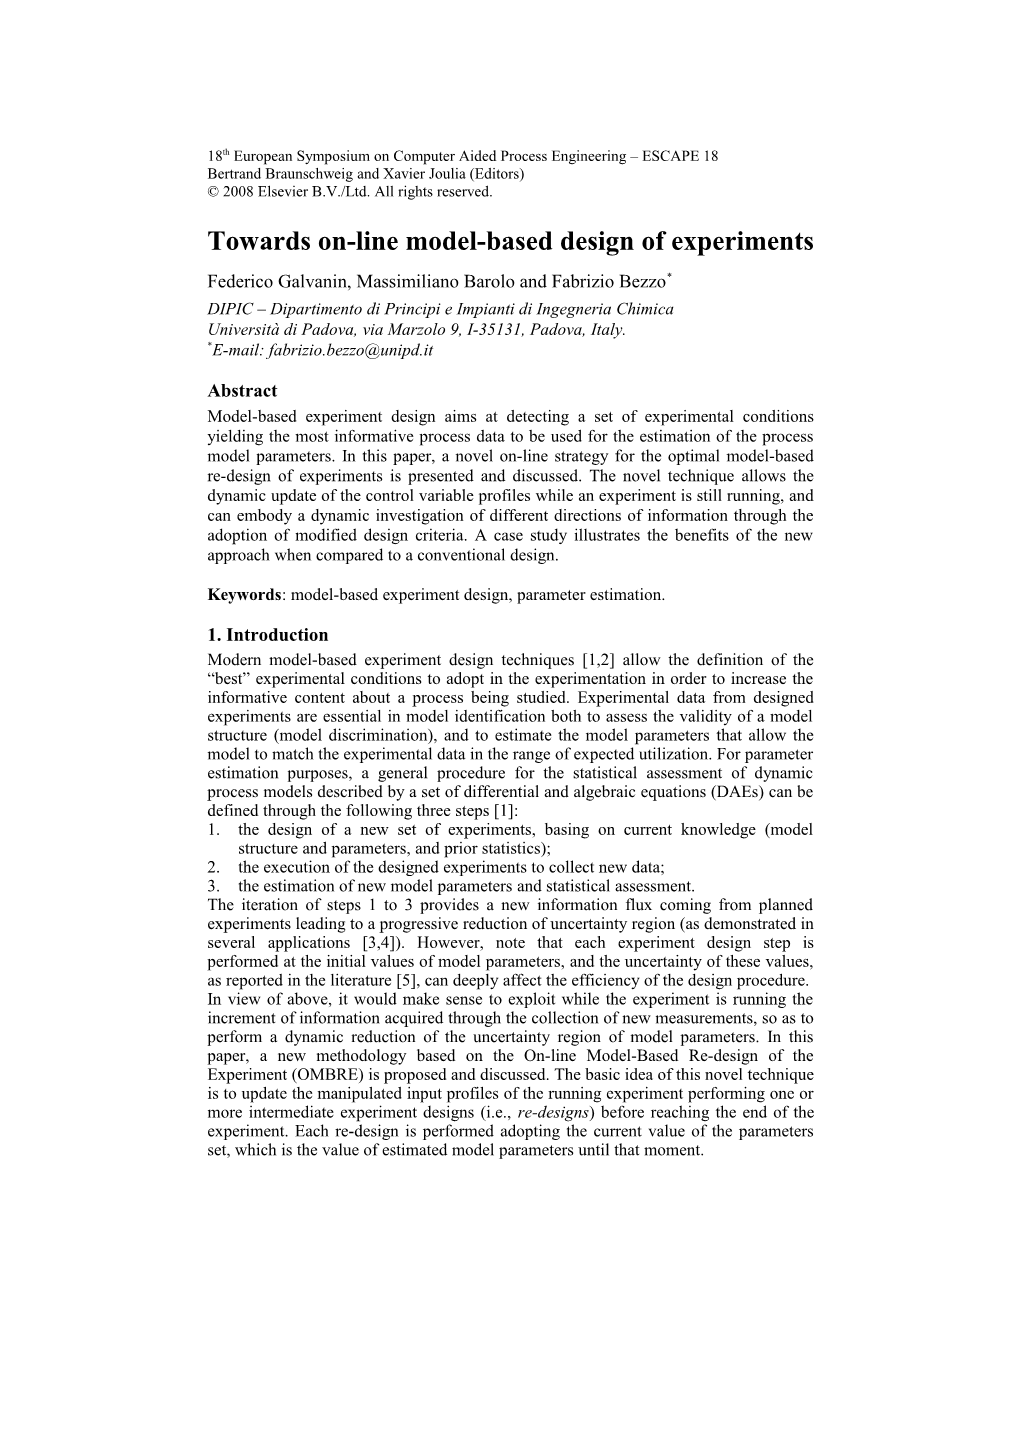 Towards On-Line Model-Based Design of Experiments